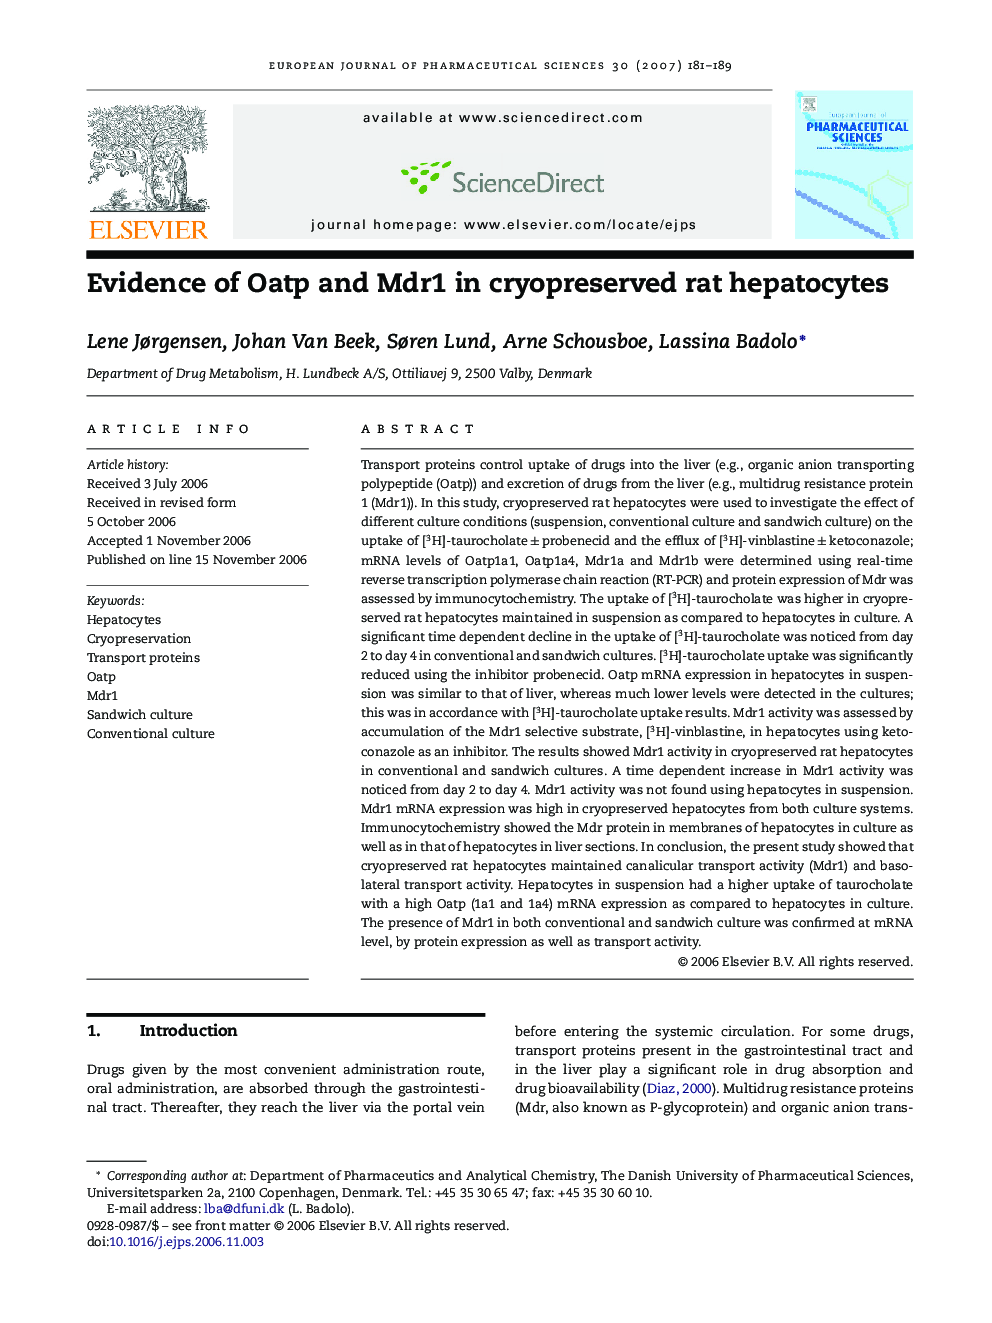 Evidence of Oatp and Mdr1 in cryopreserved rat hepatocytes